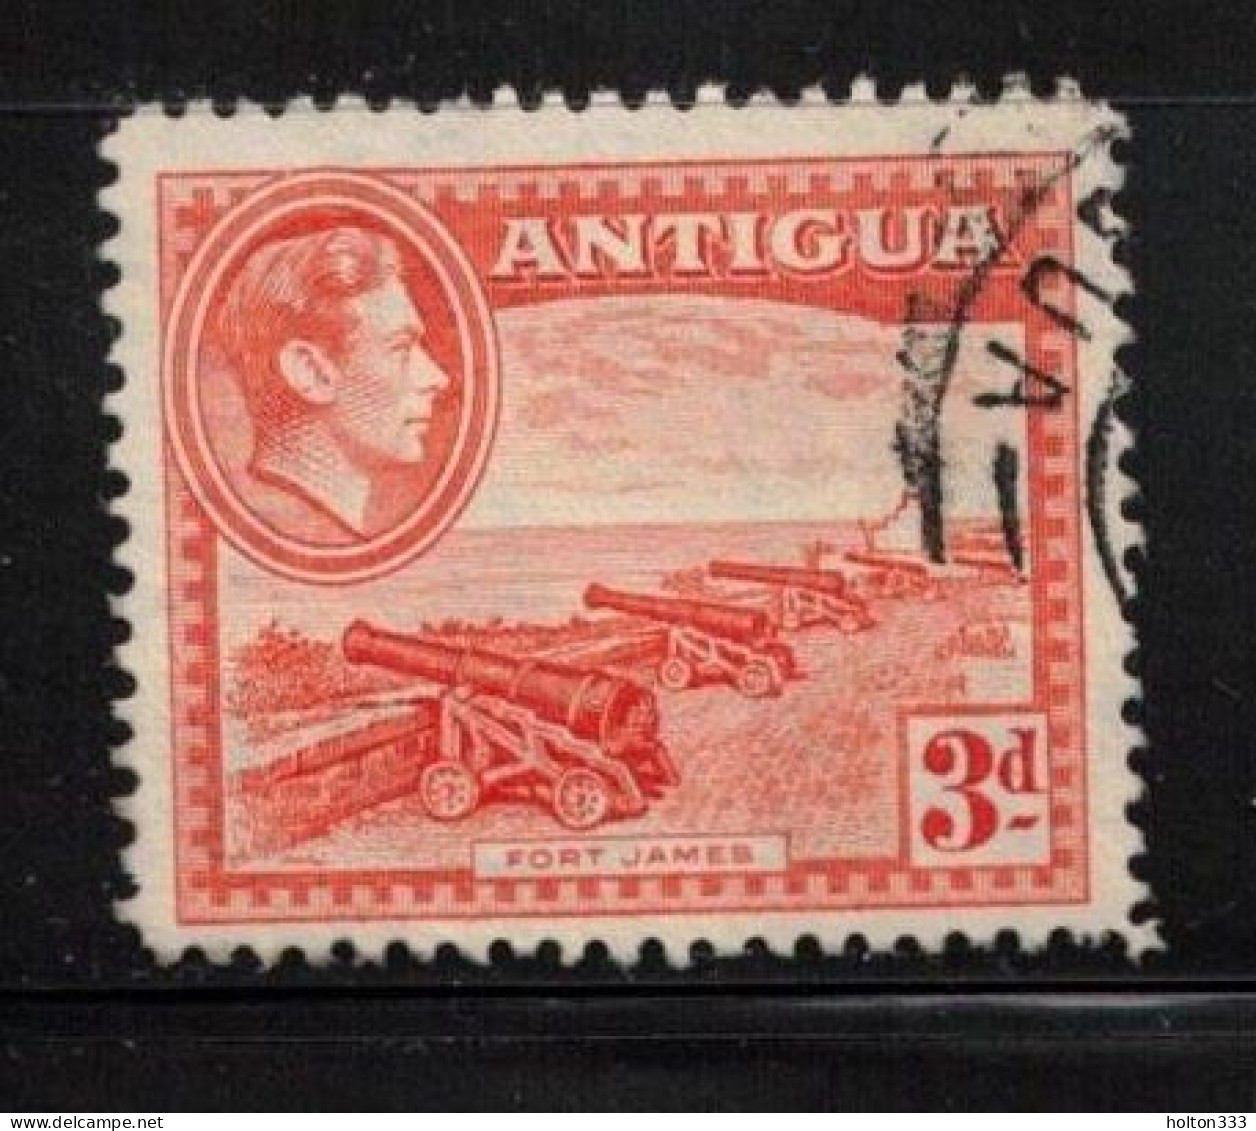 ANTIGUA Scott # 89 Used - KGVI & Cannons At Fort James - 1858-1960 Crown Colony